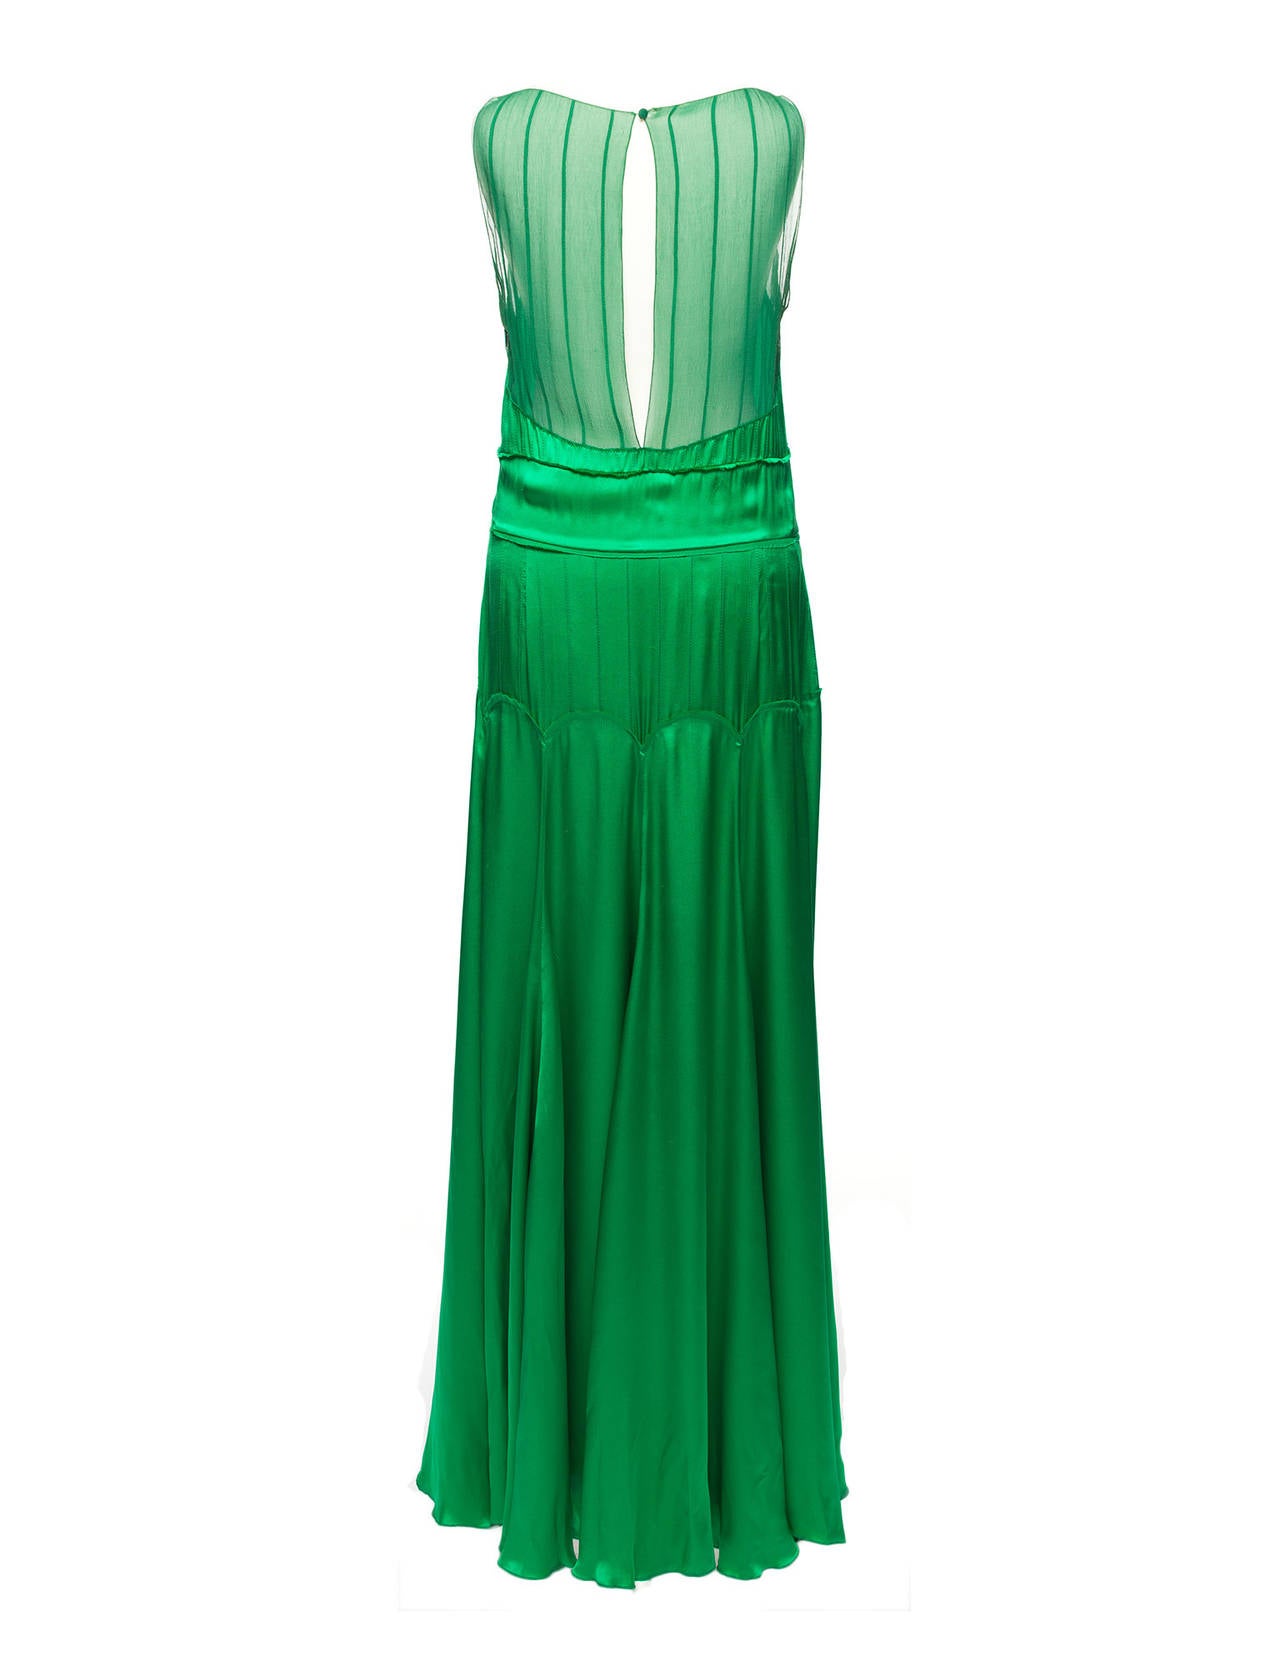 Chloe By Phoebe Philo green silk 1920's style evening dress, Sz. S at ...